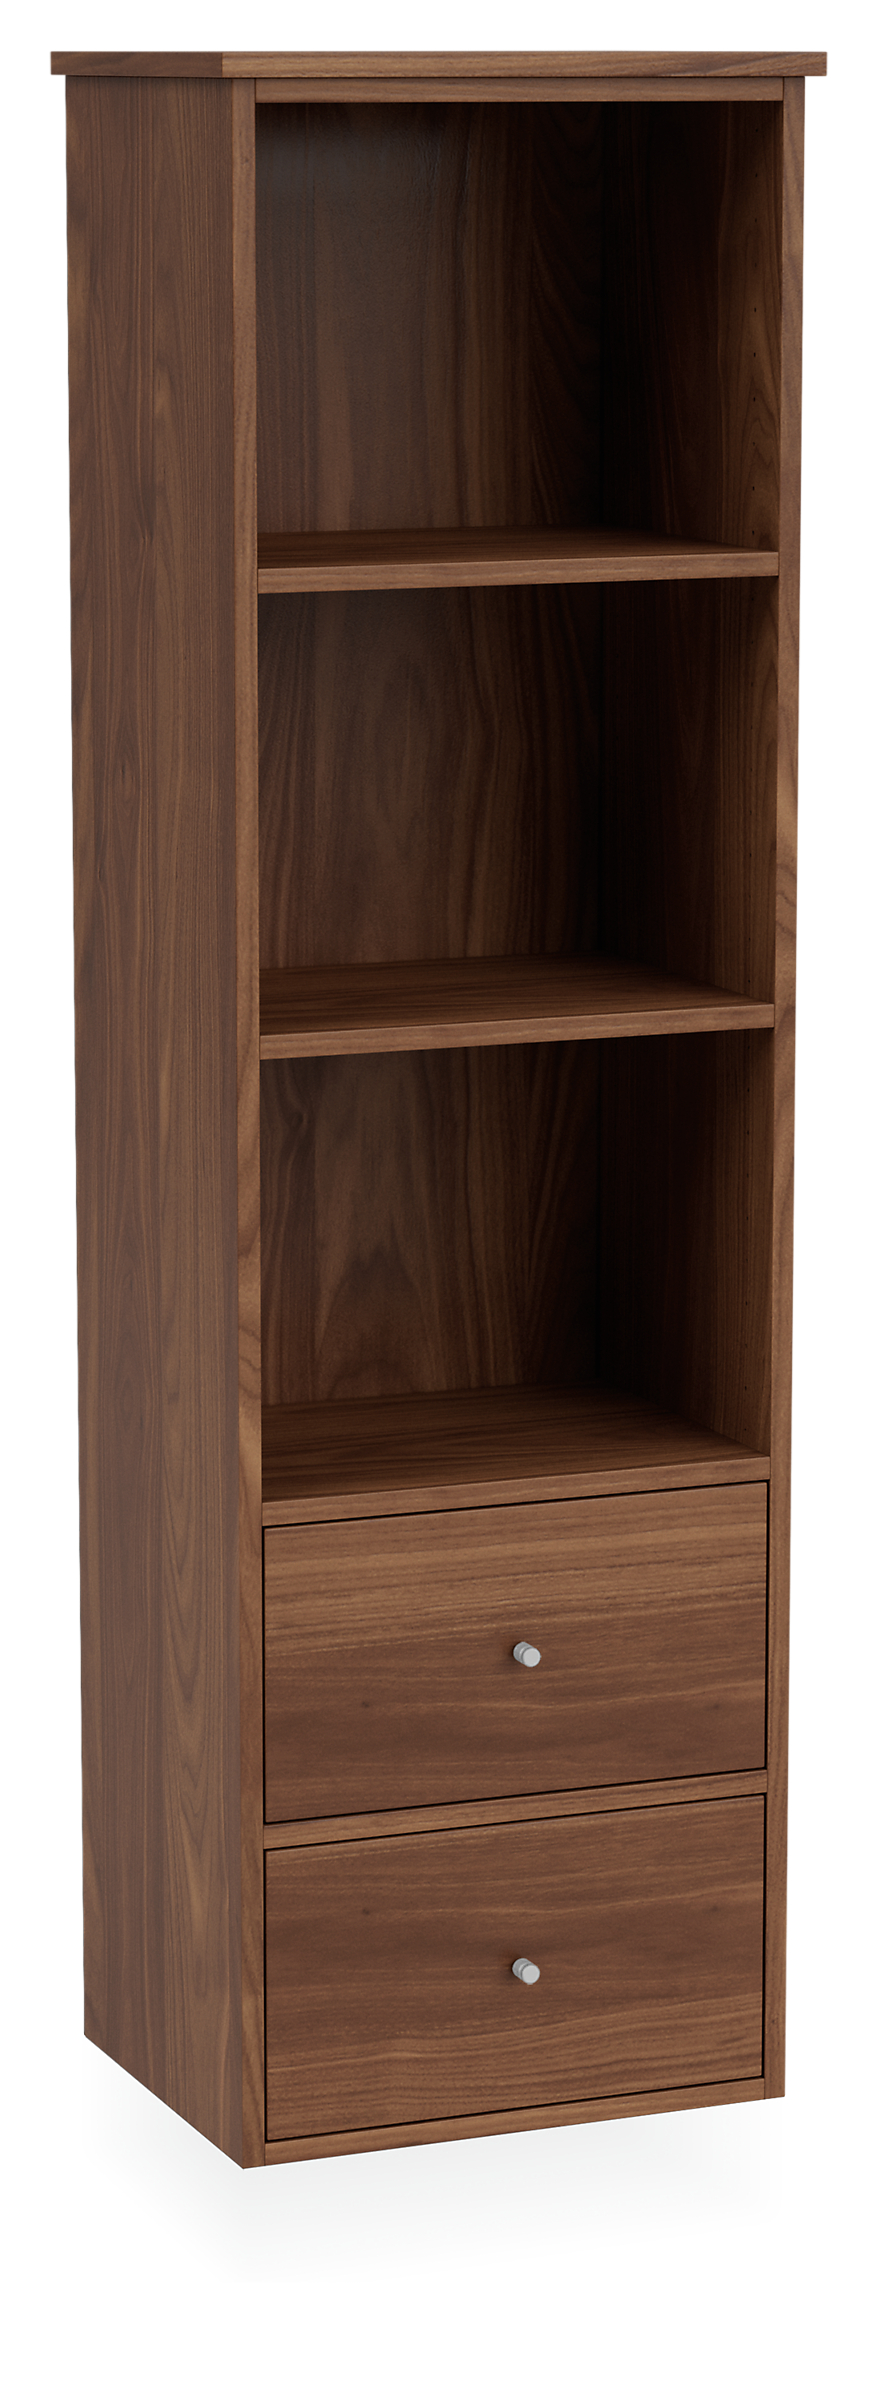 Linear Floating Linen Cabinets